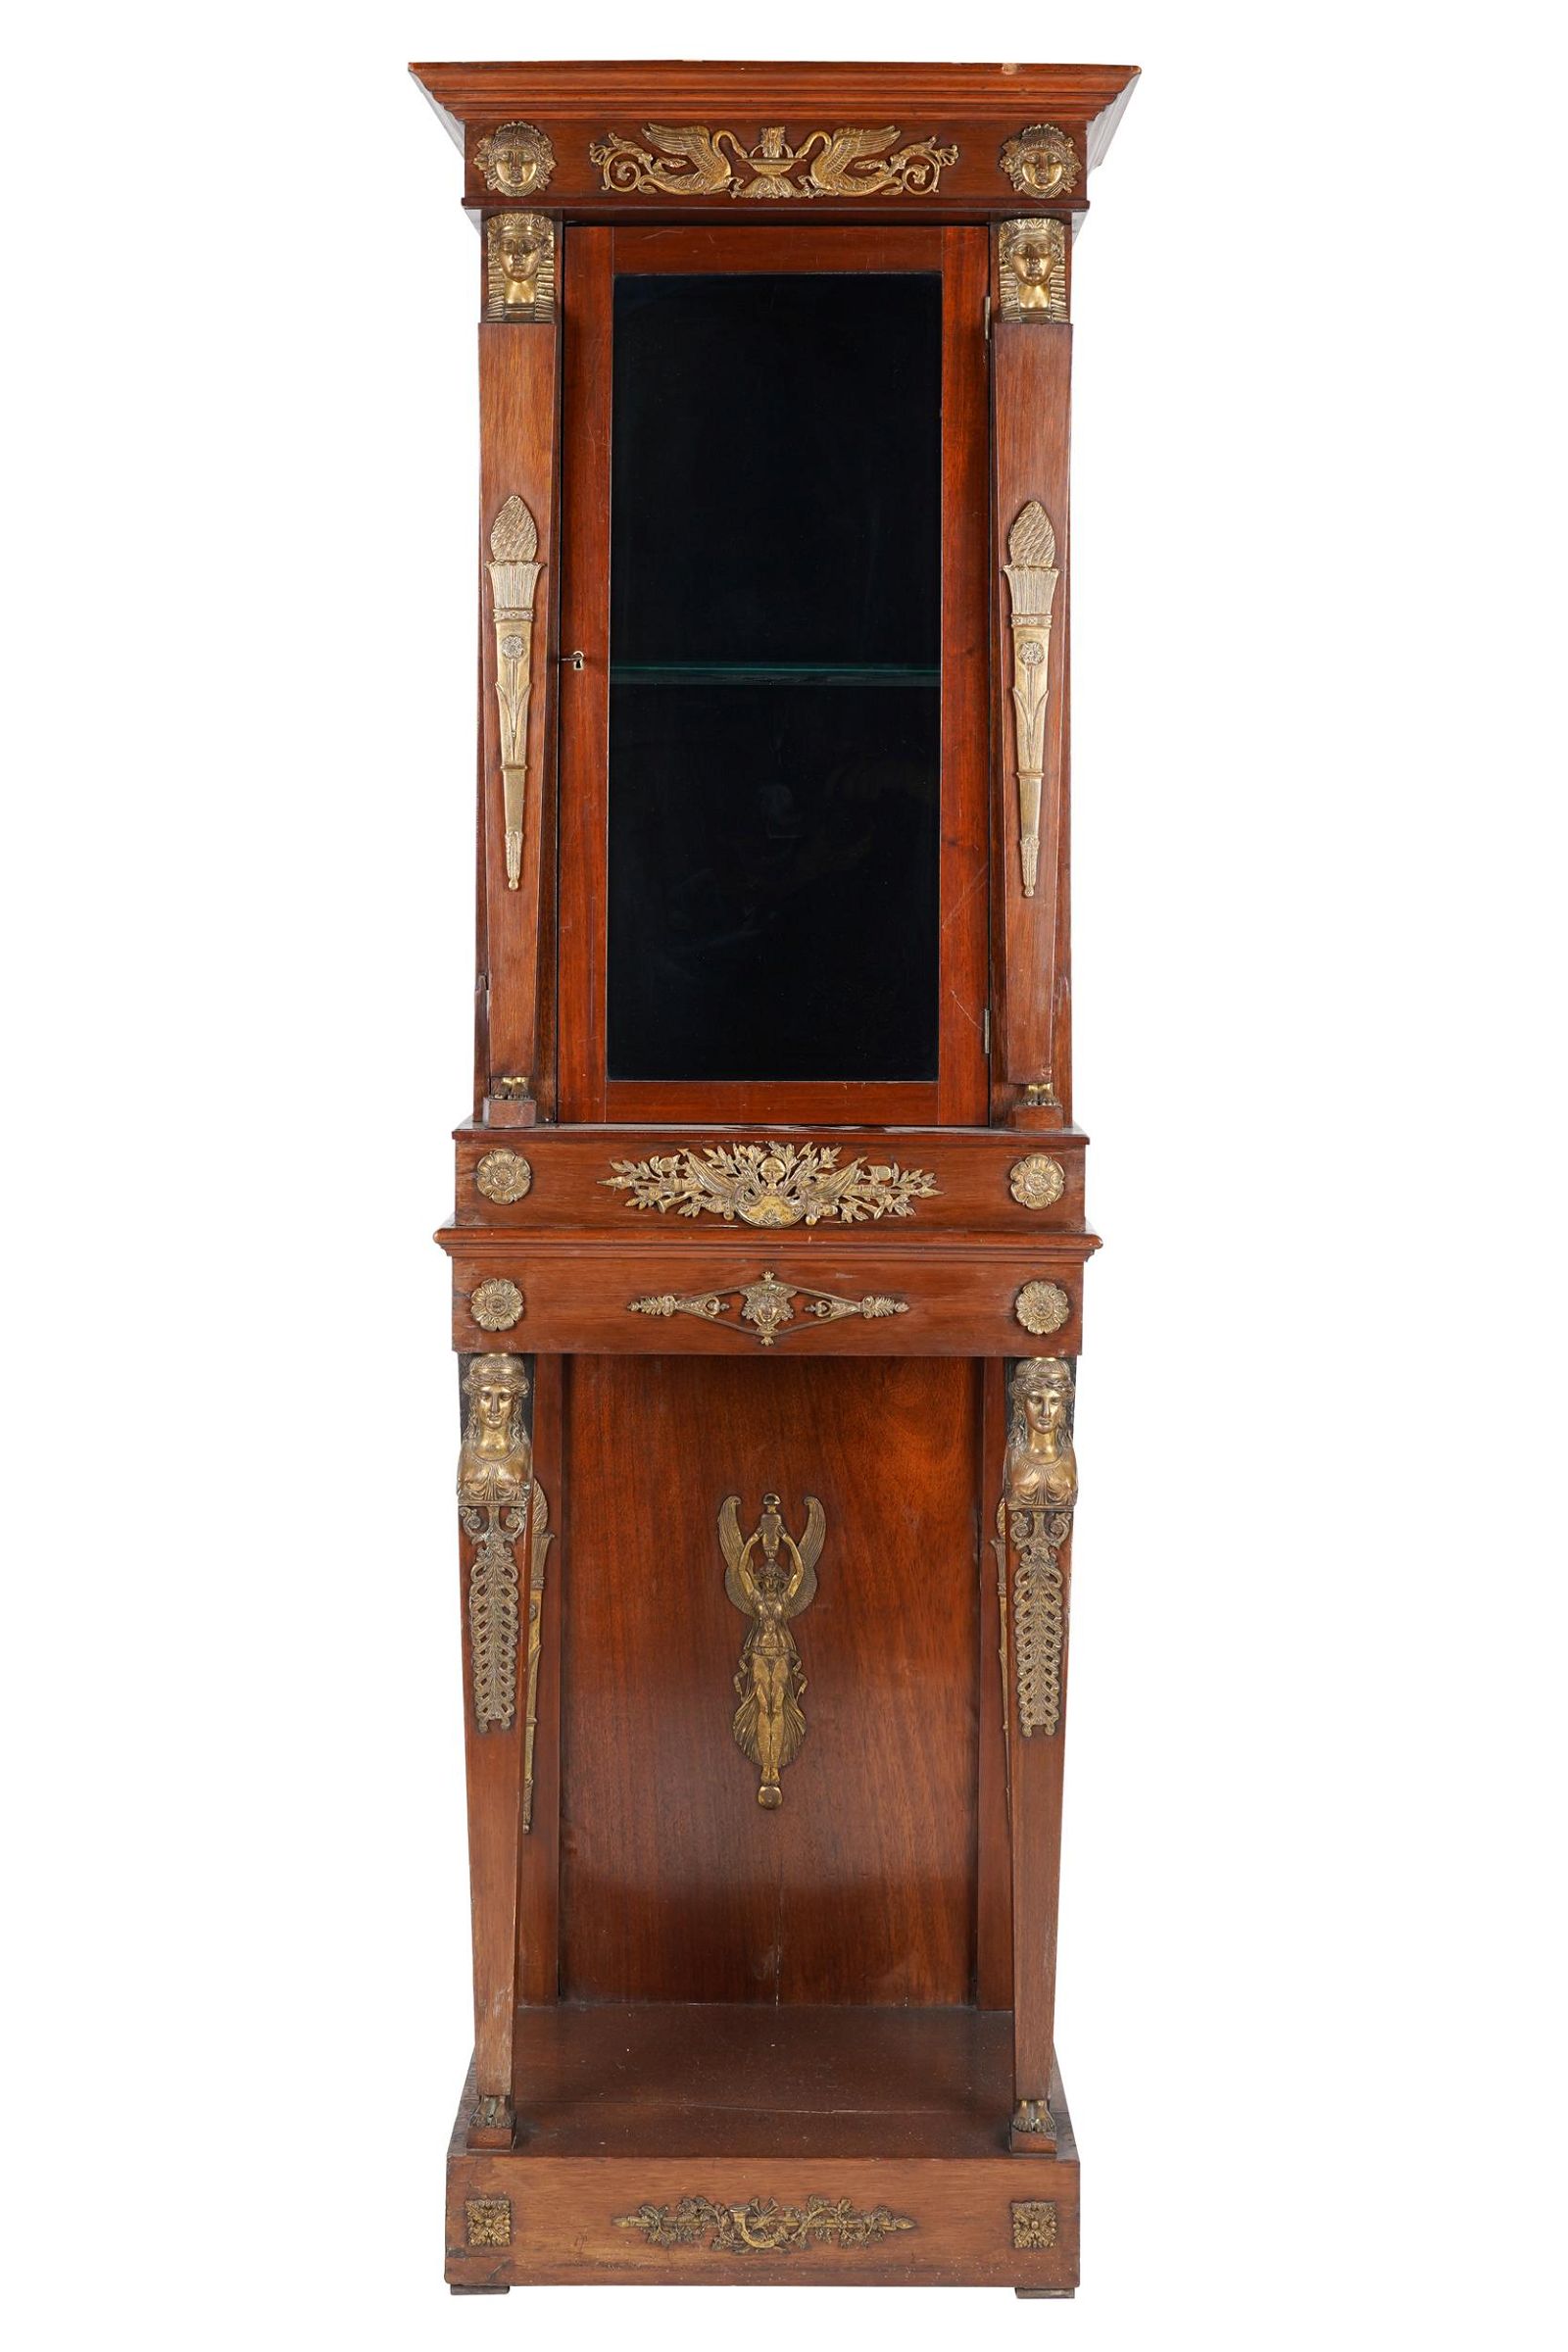 EMPIRE STYLE CABINET ON STANDin